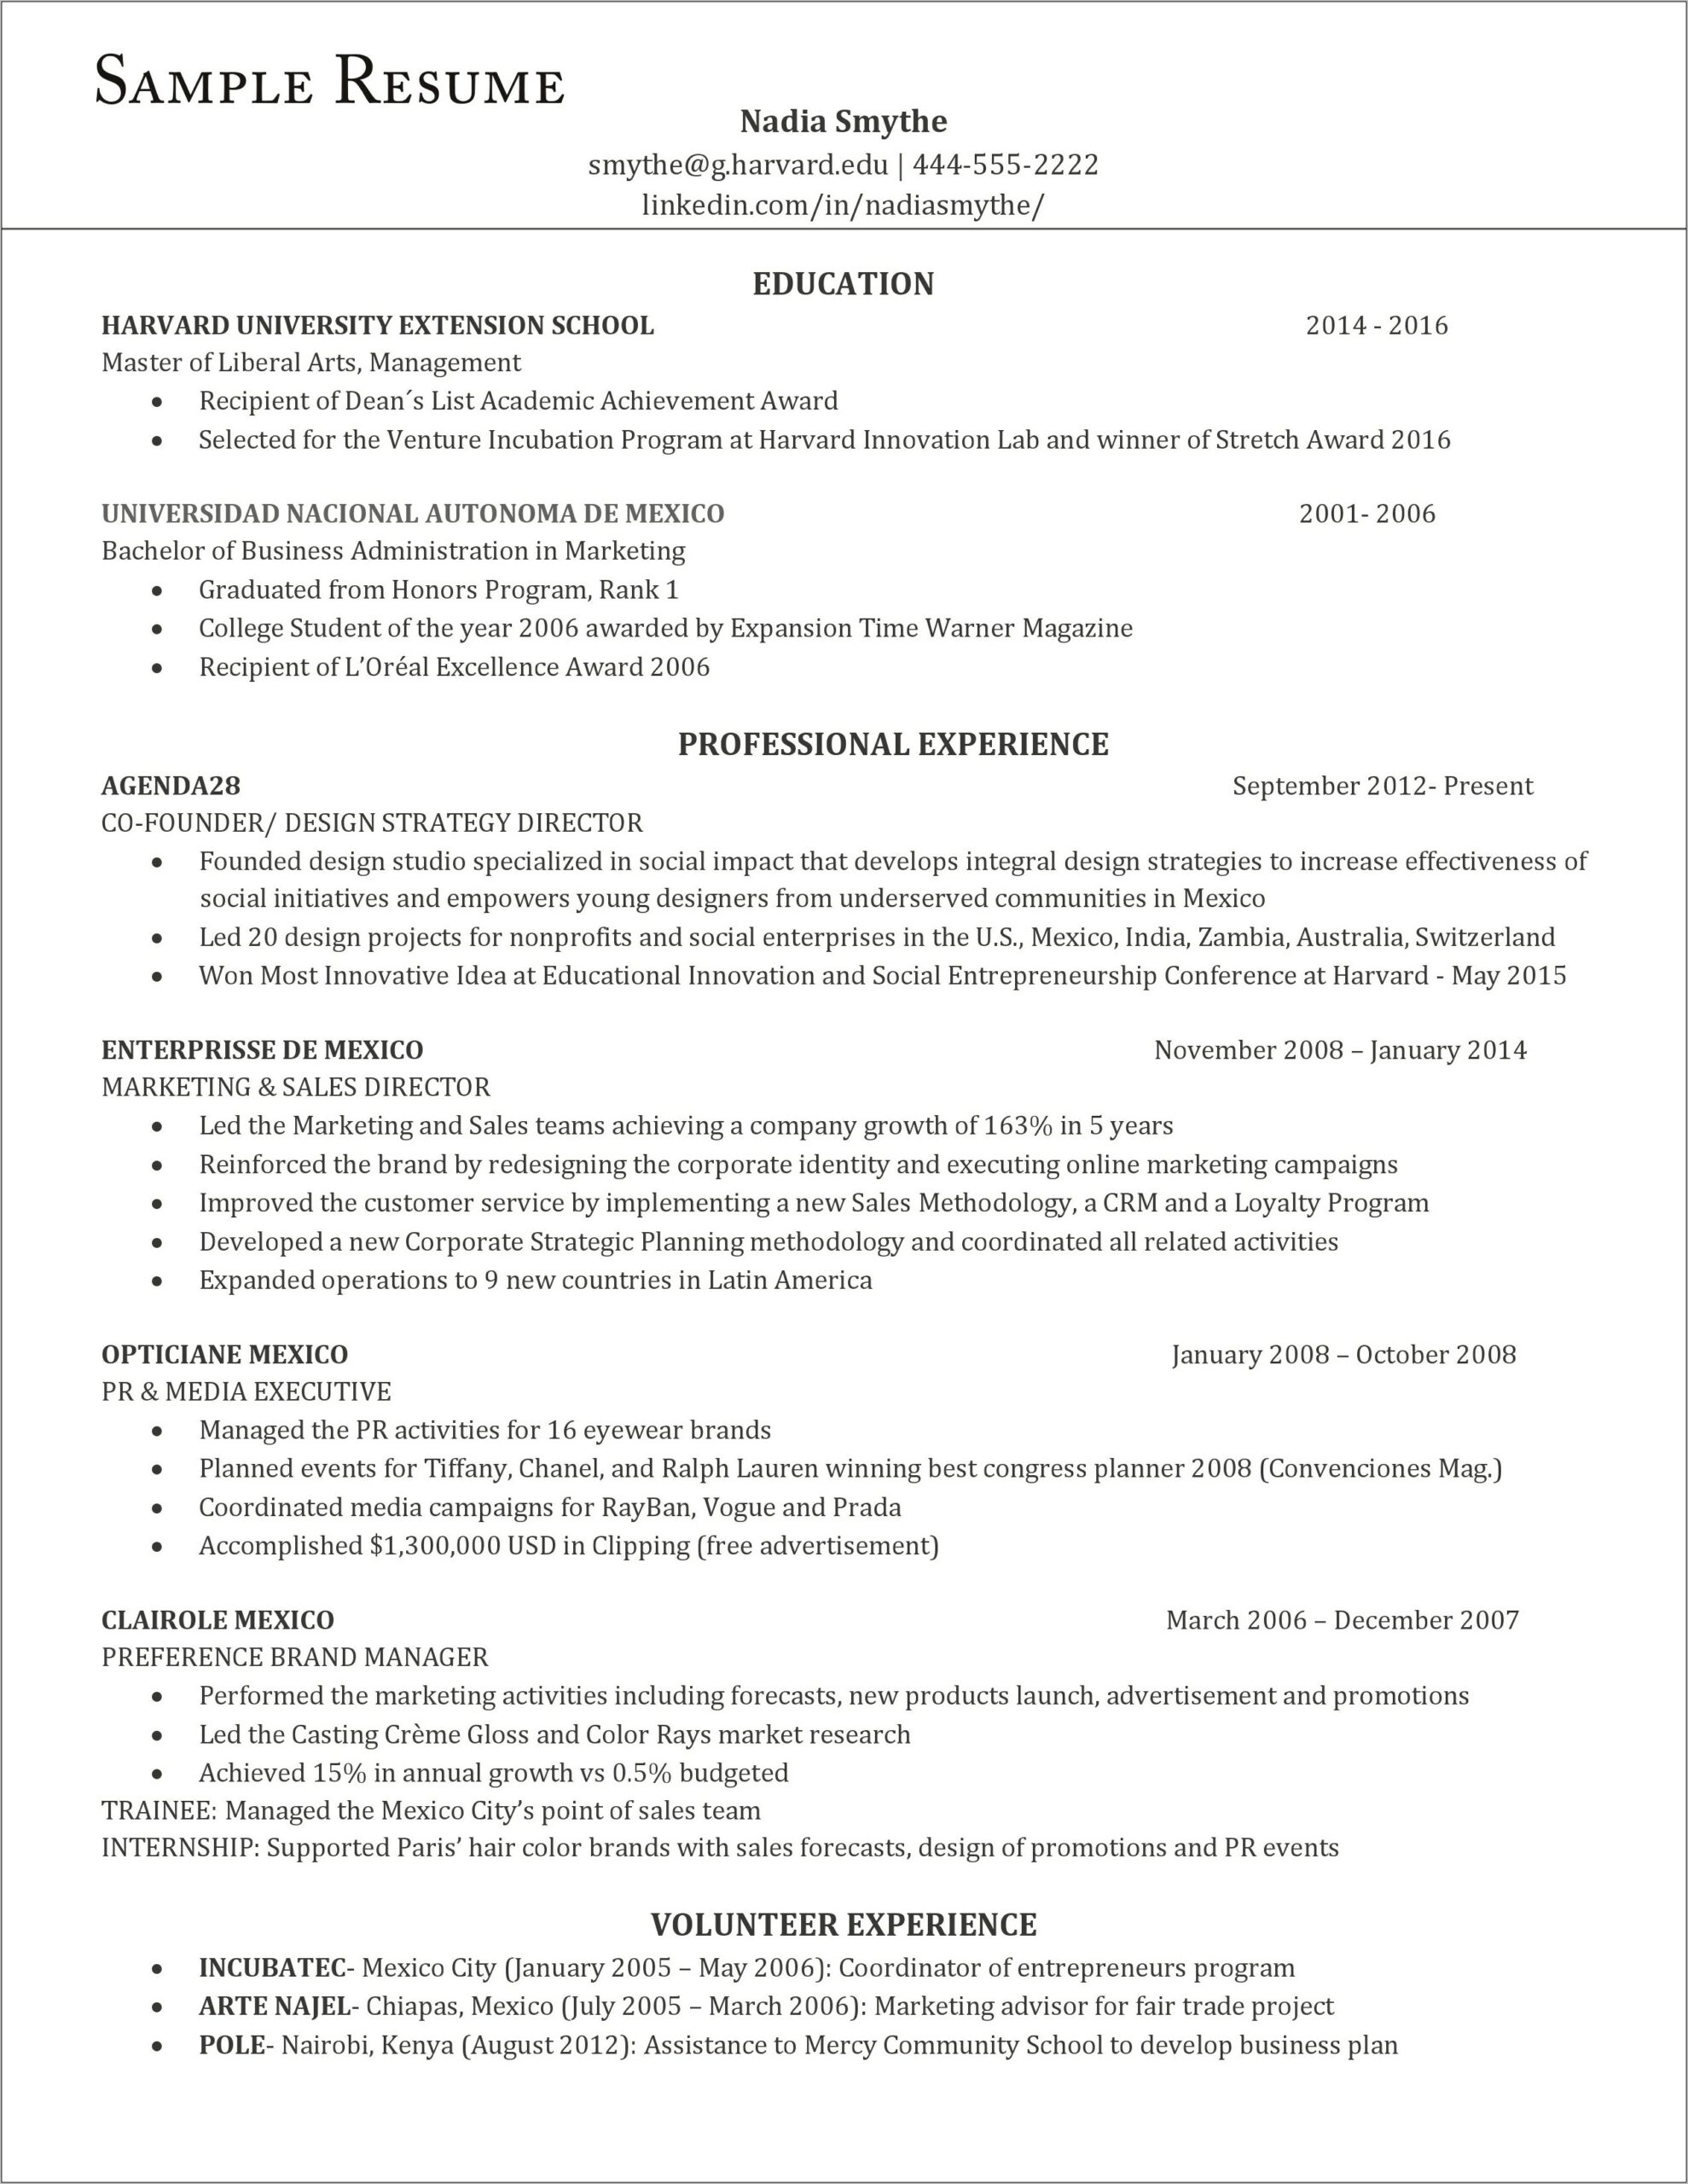 Resume I Only Have Volunteer Experience